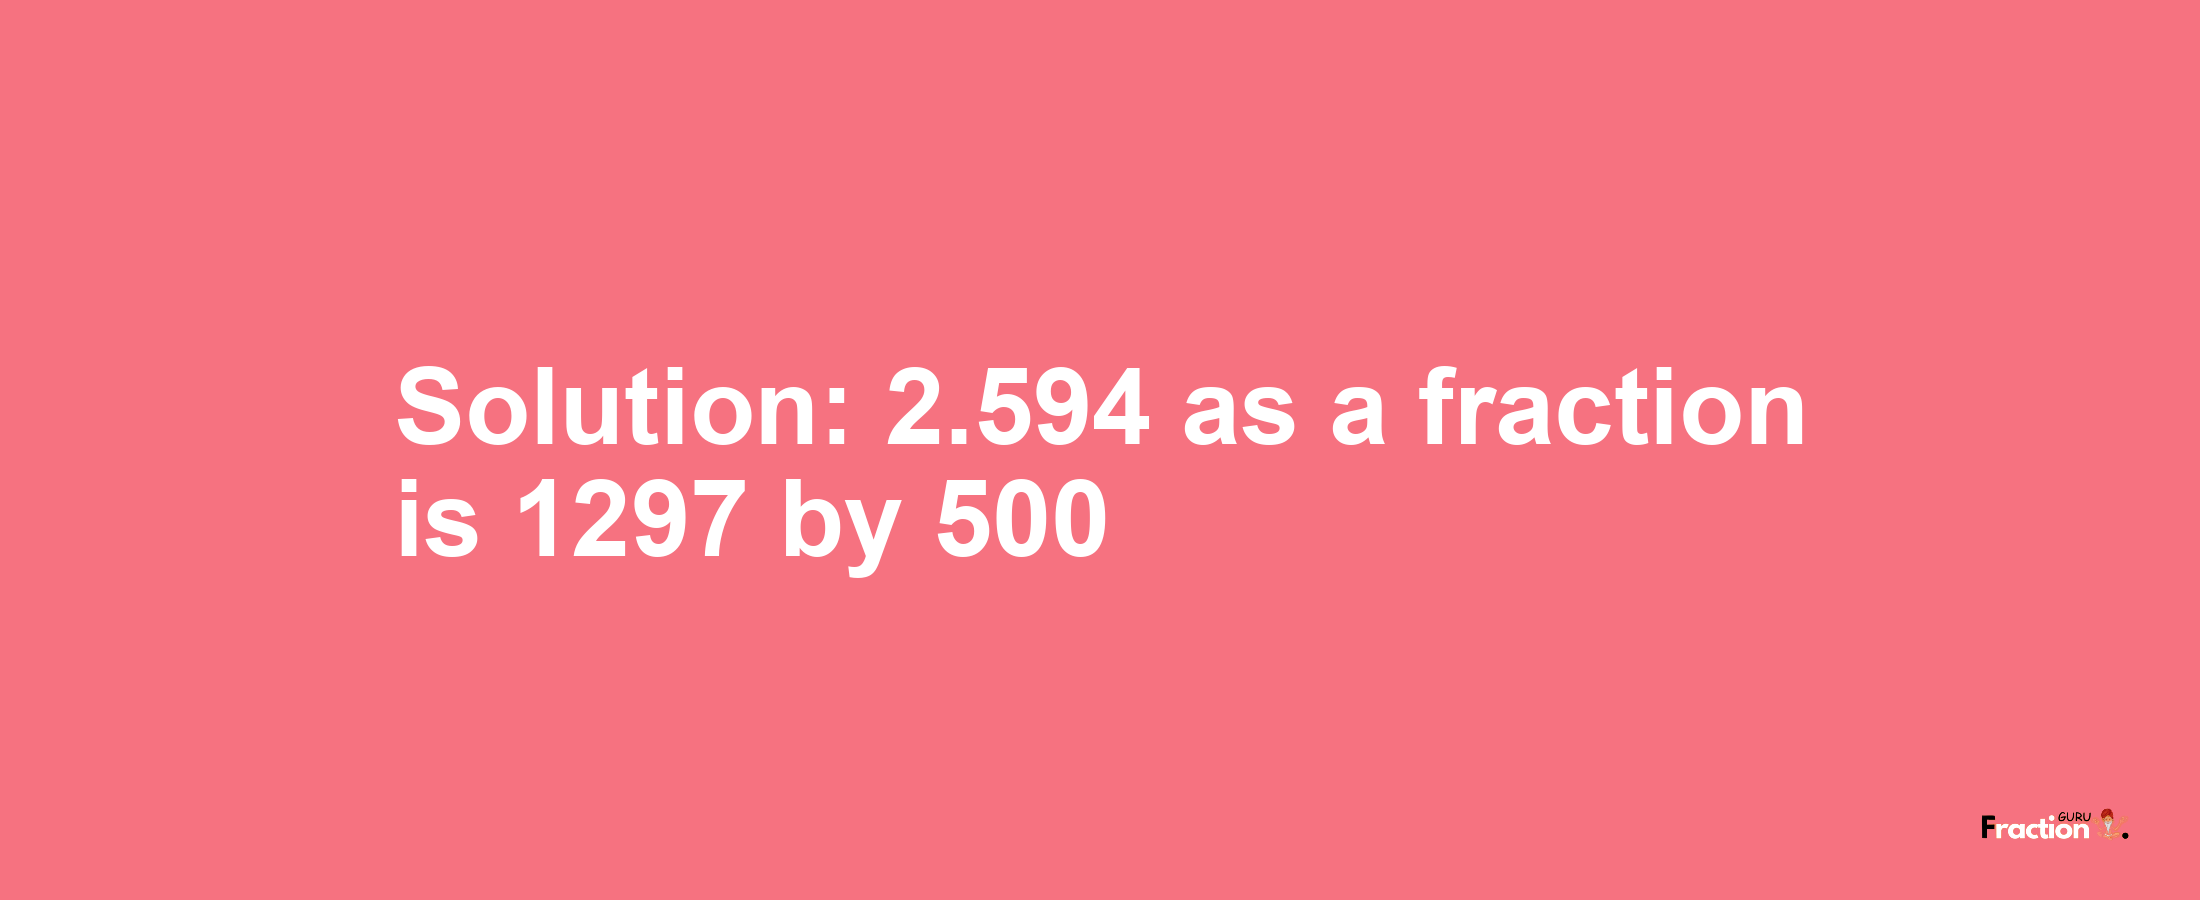 Solution:2.594 as a fraction is 1297/500